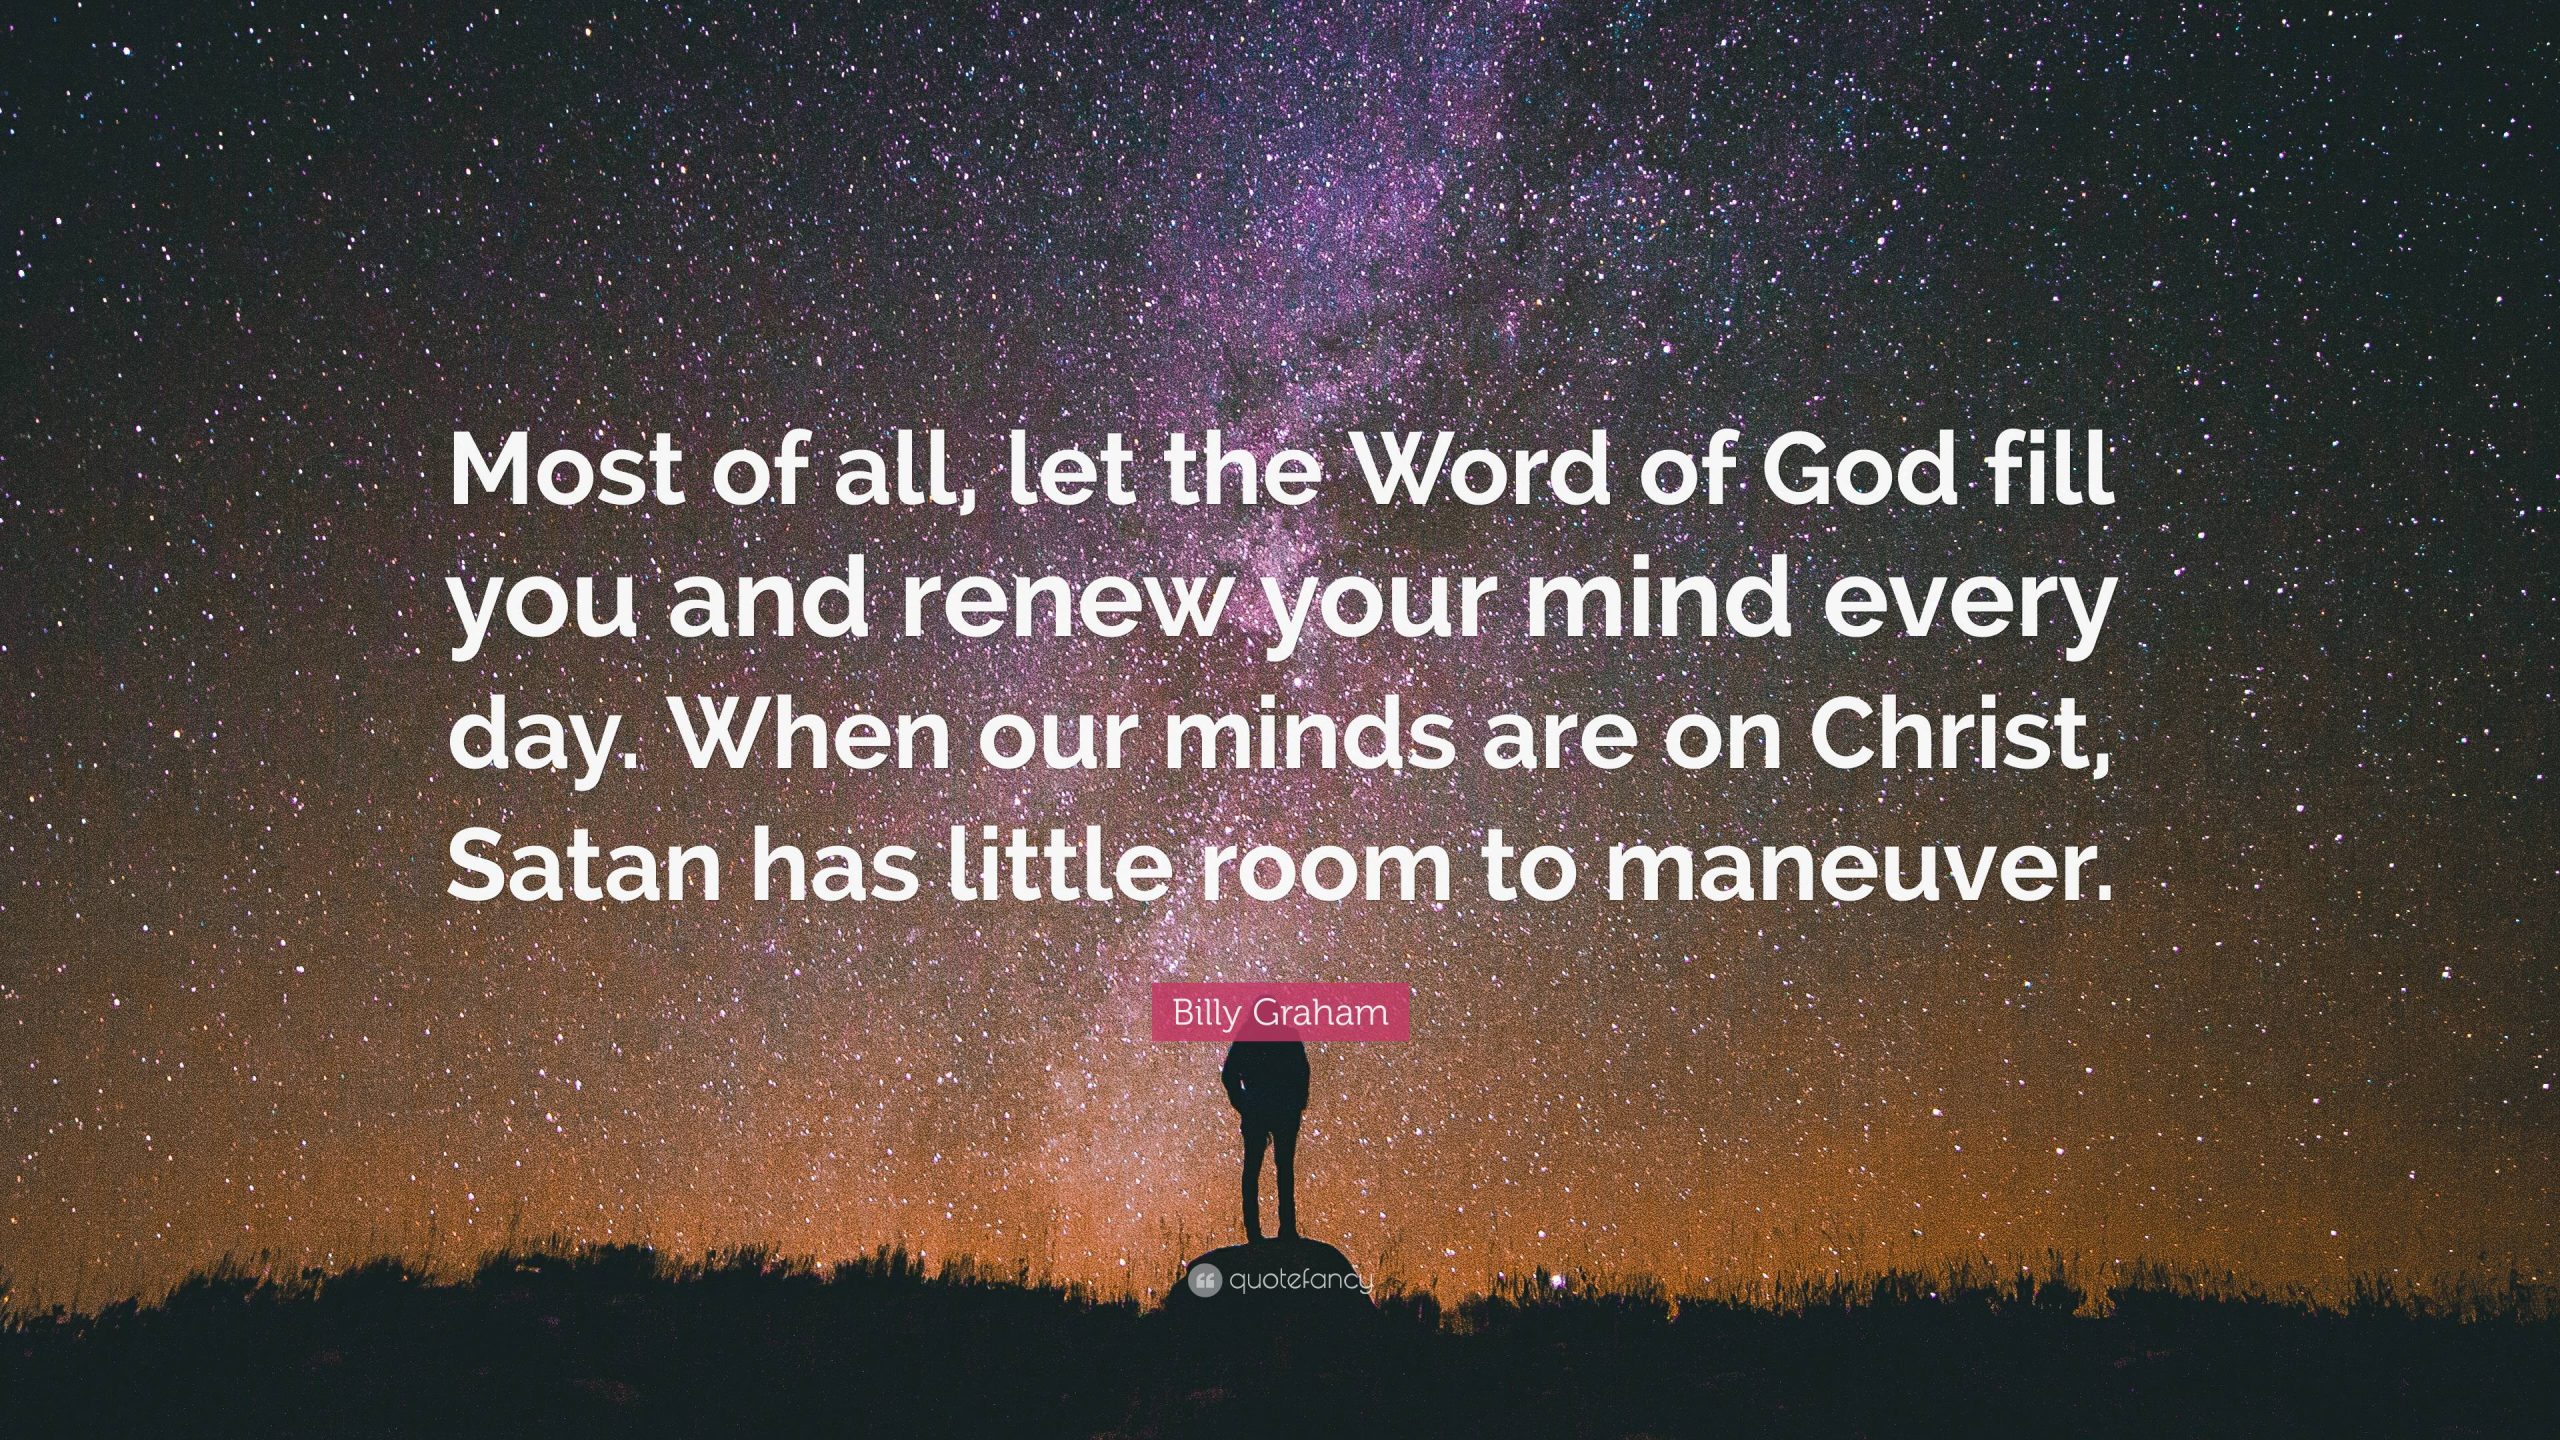 The Renewal of the Christian Mind